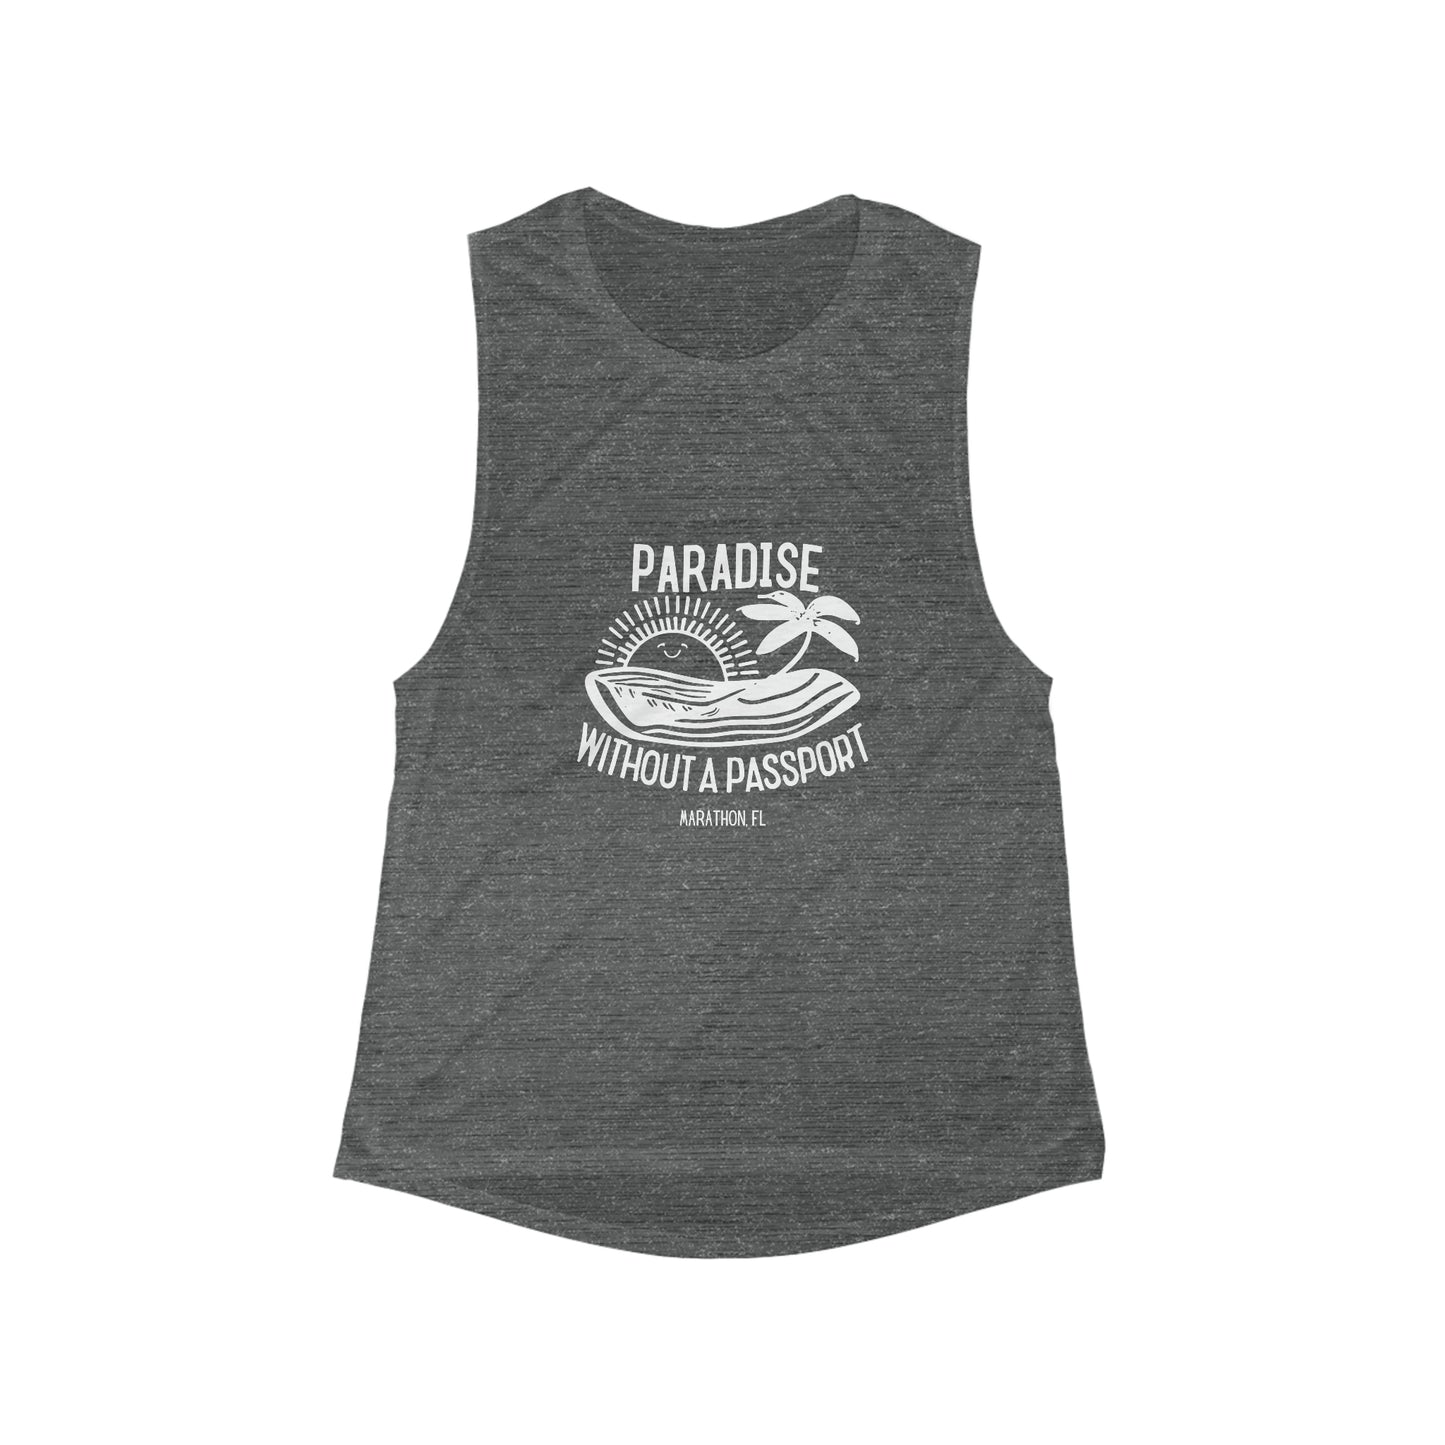 "paradise without a passport" - women's tank top, women's tank, florida keys tank top, florida keys, marathon